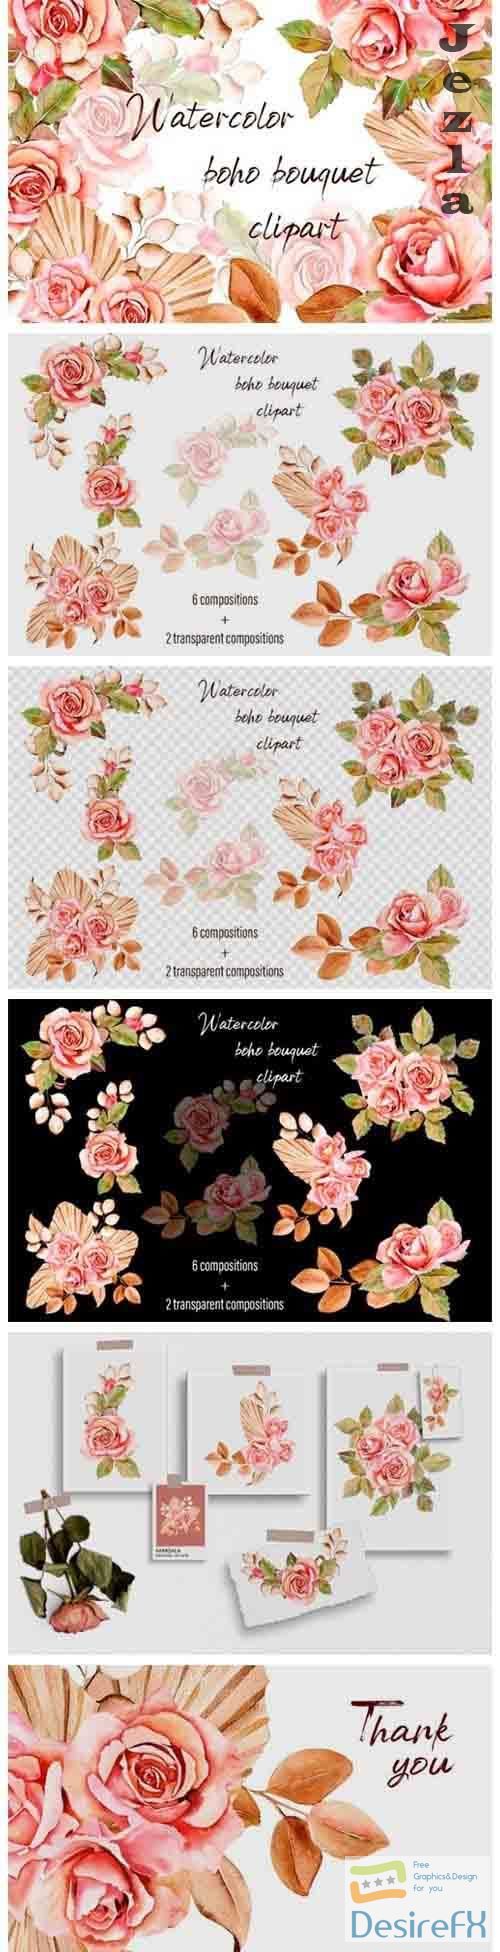 Watercolor bouquet pink roses - 1037713